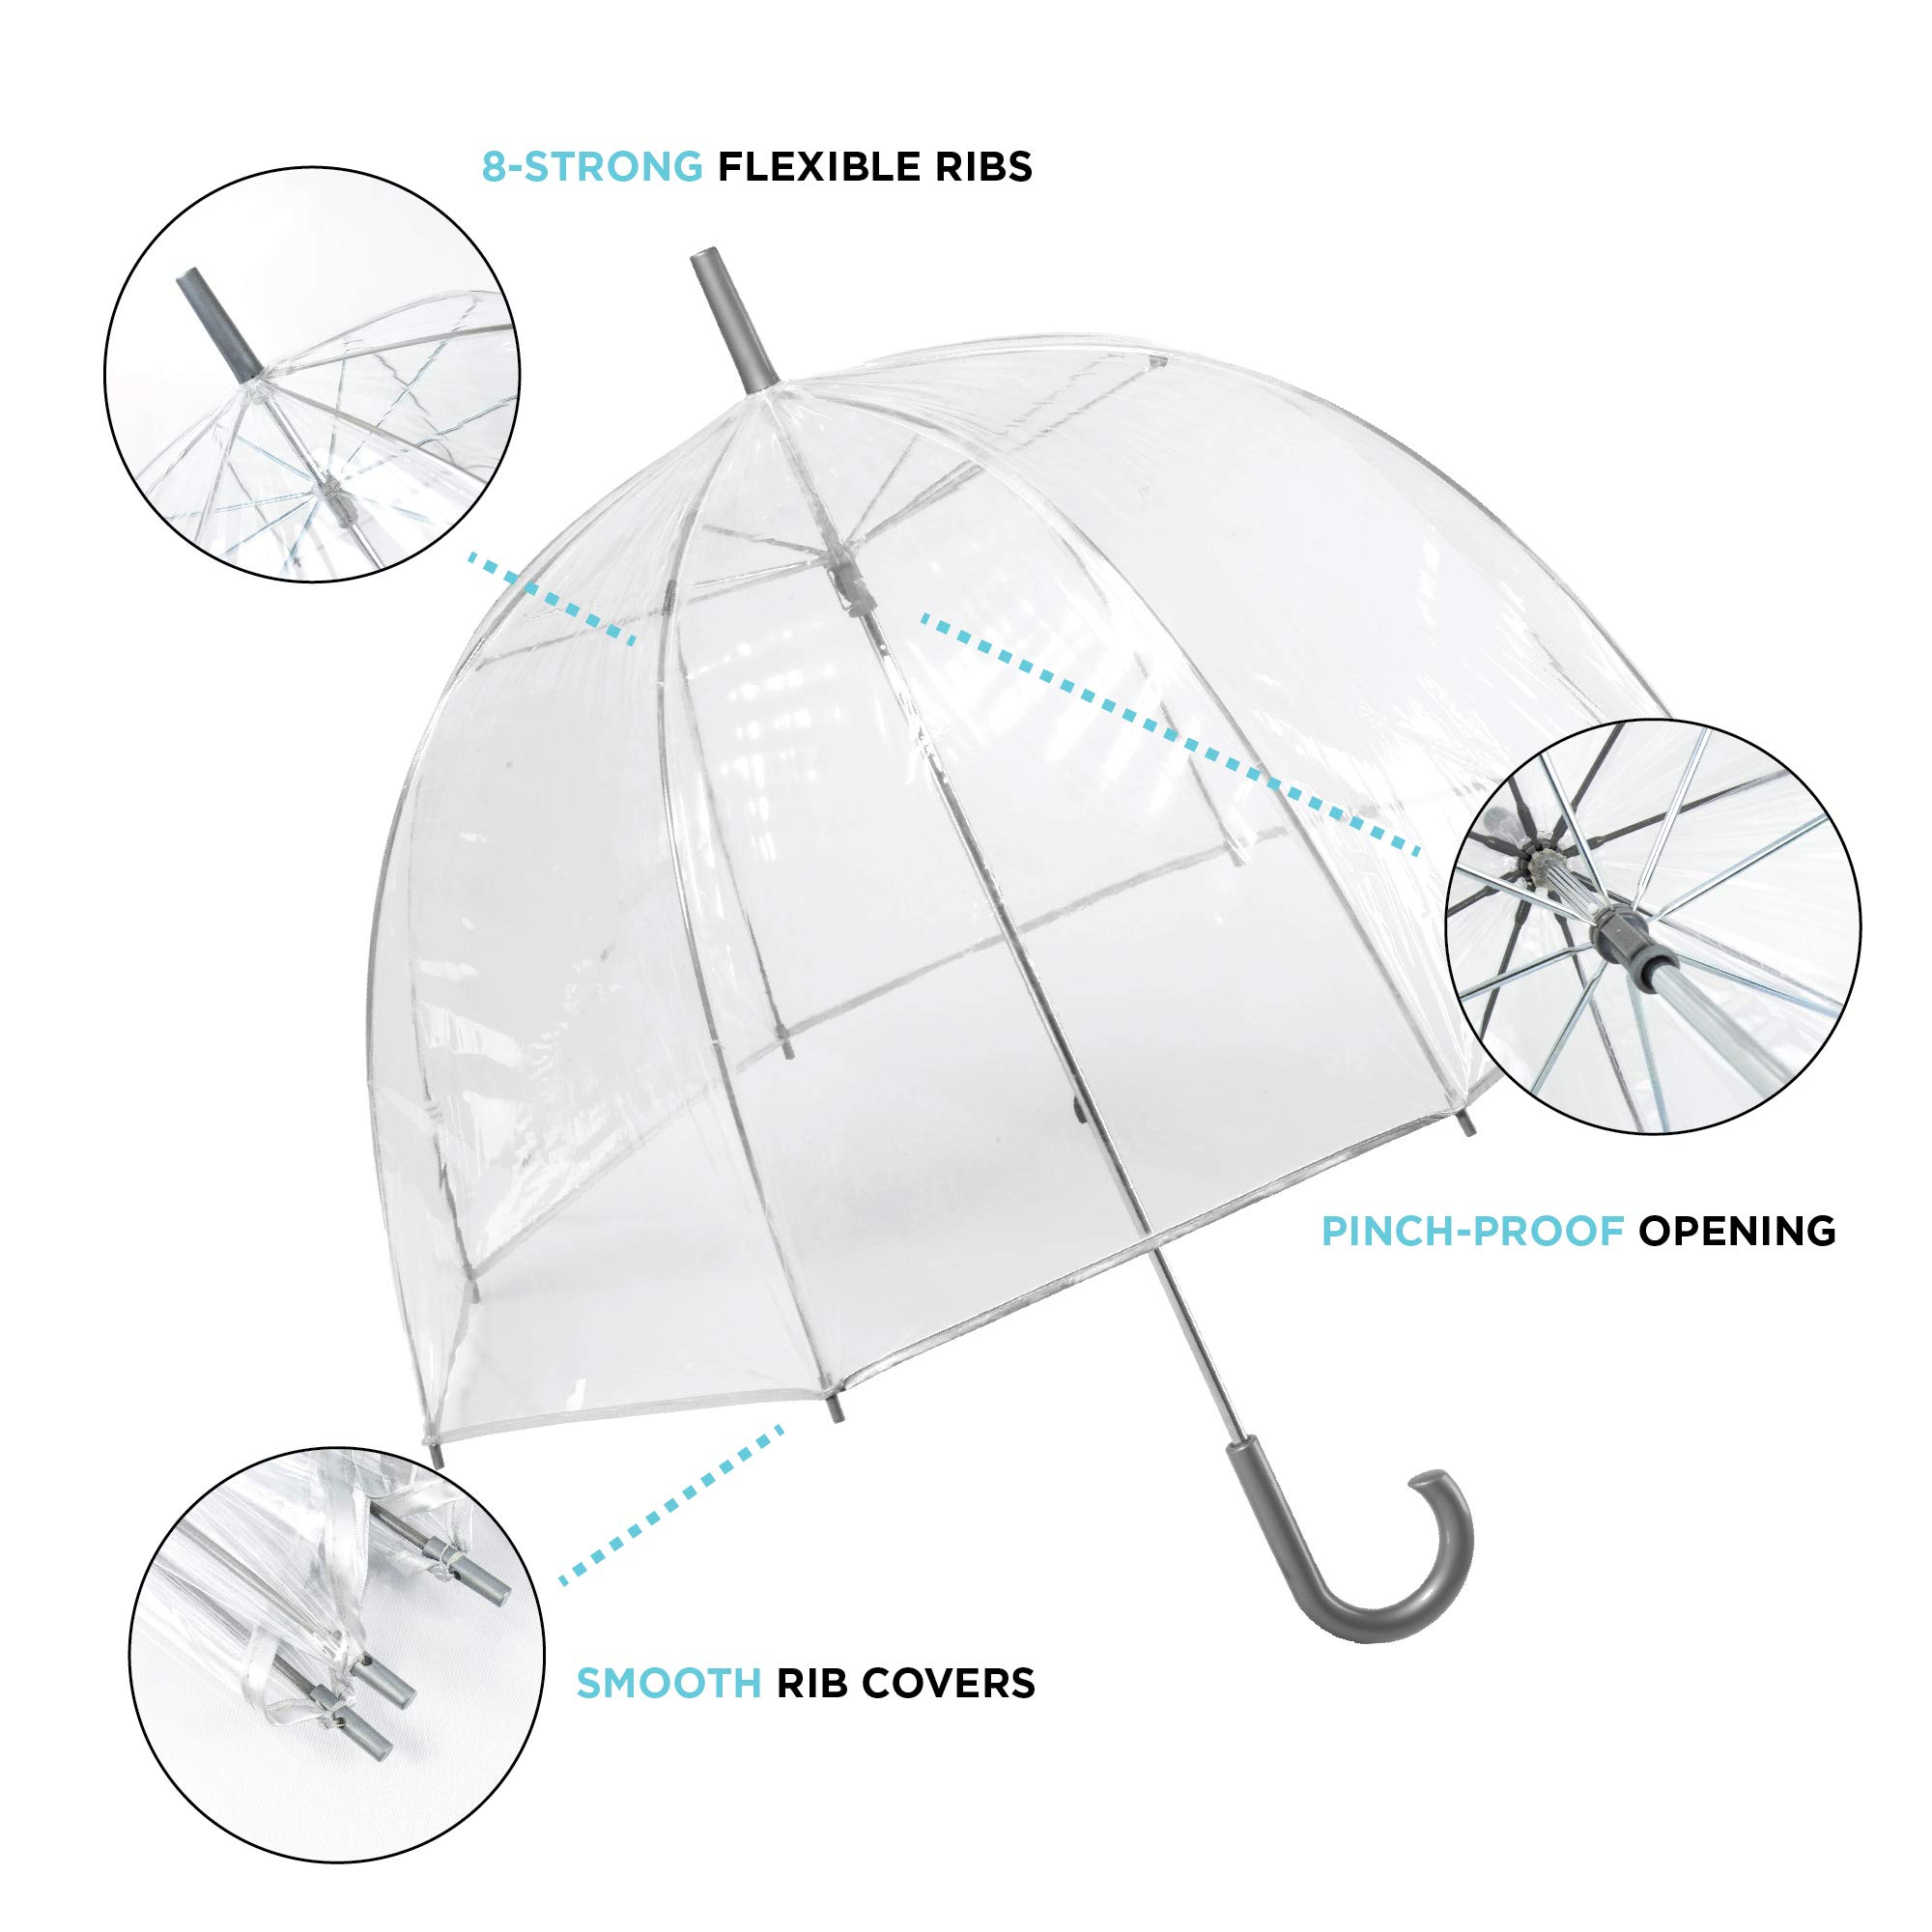 totes Women's Clear Bubble Umbrella – Transparent Dome Coverage – Large Windproof and Rainproof Canopy – Ideal for Weddings, Proms or Everyday Protection, Clear